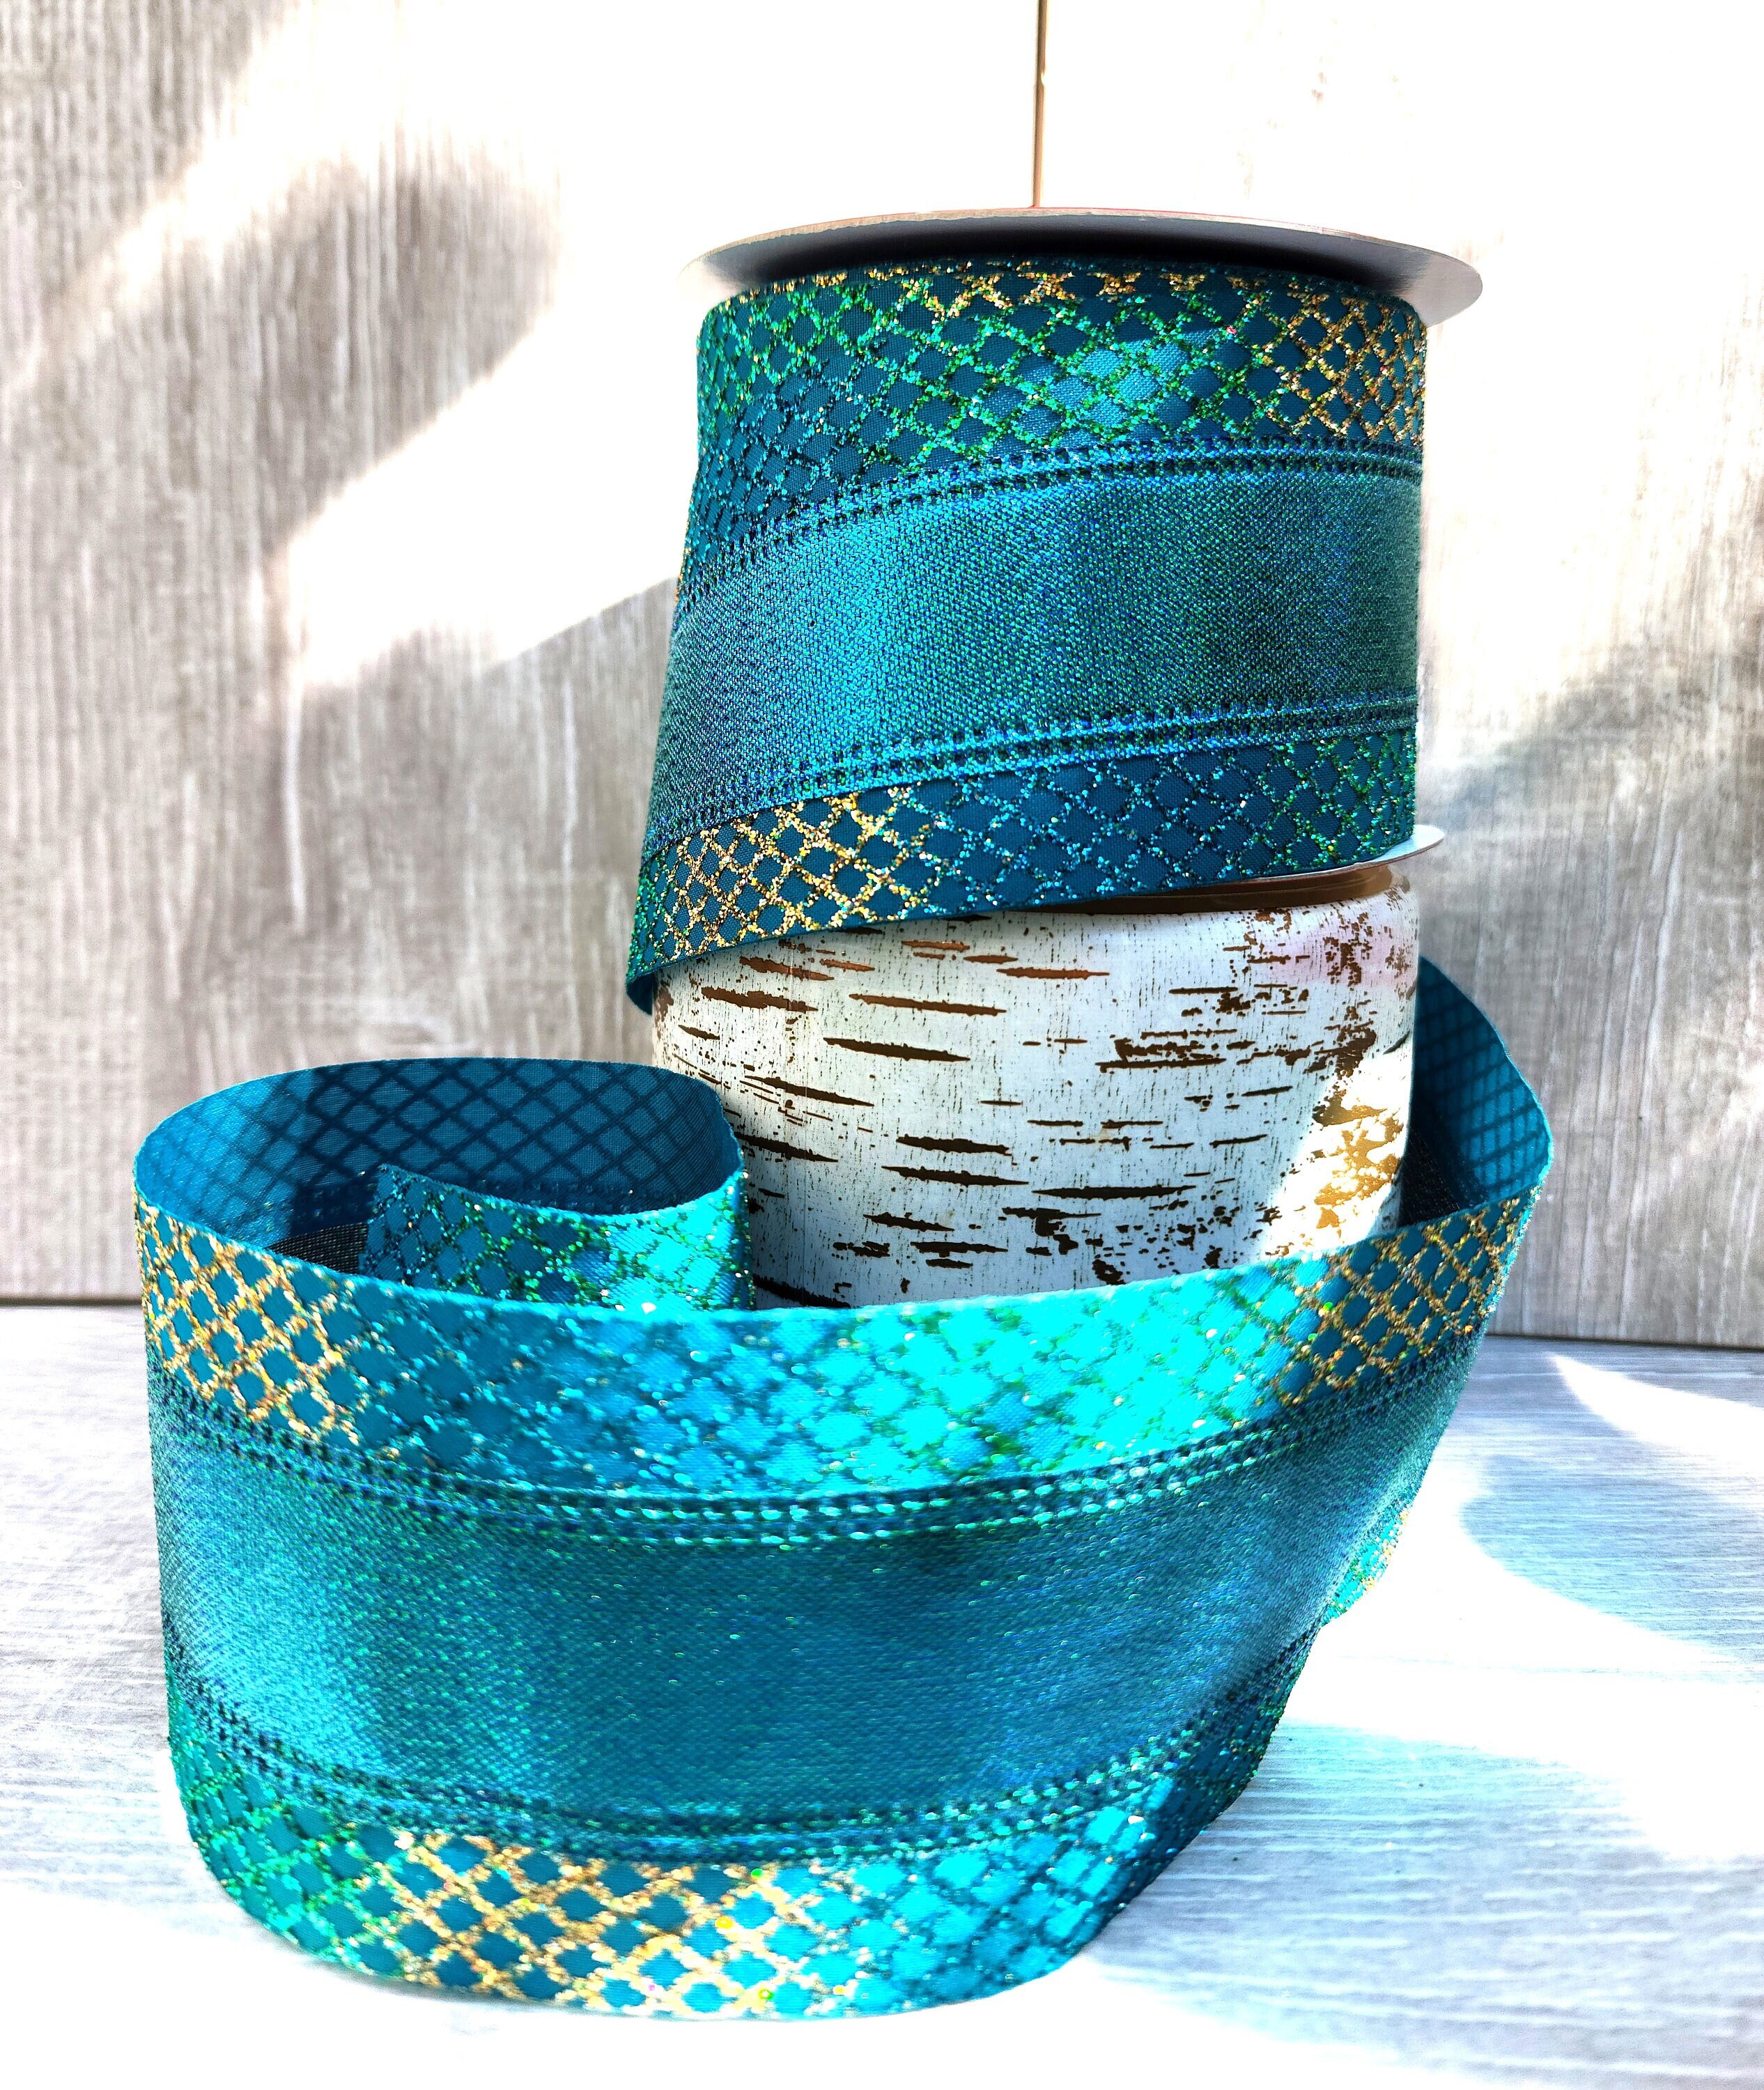 Offray Teal Double Faced Satin Ribbon, 1-1/2 or 5/8 Wide Teal Satin Ribbon,  Made in USA. 